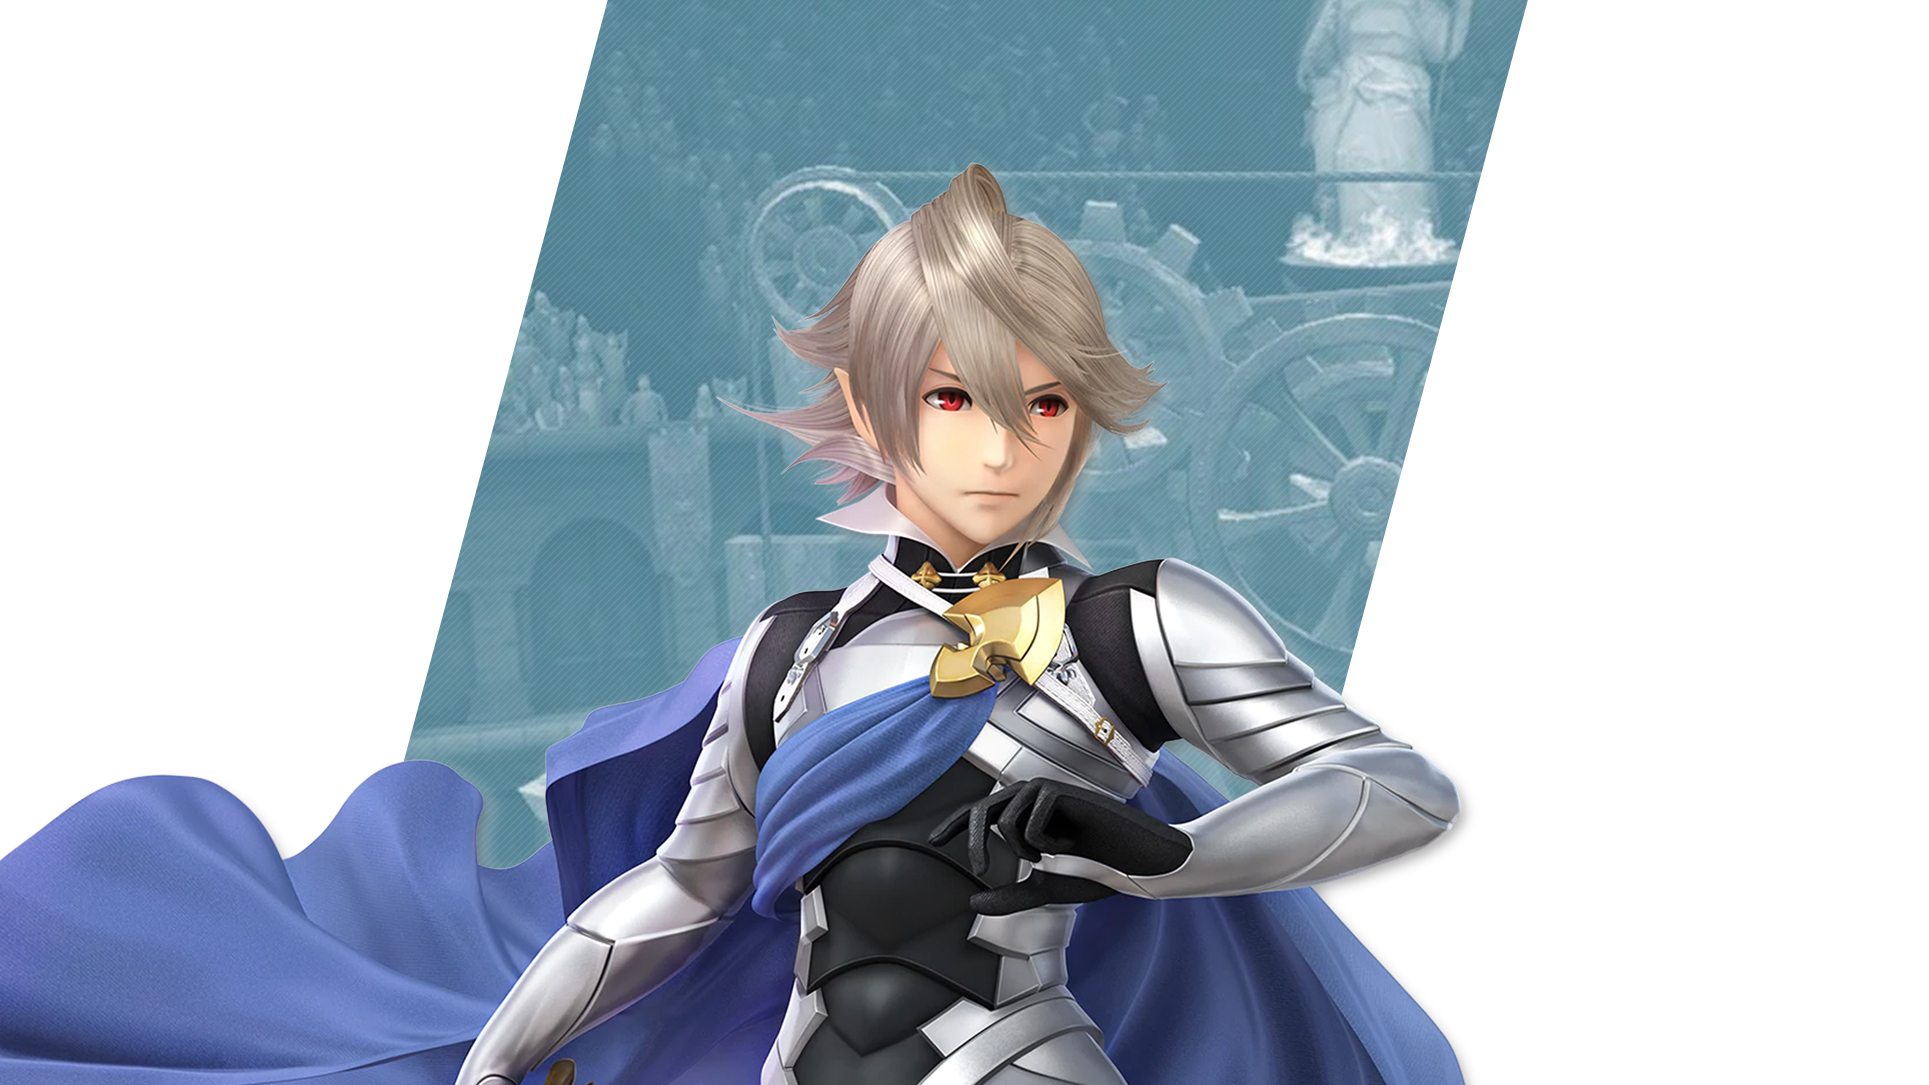 The Super Smash Bros Ultimate Corrin wallpaper has arrived to celebrate the...